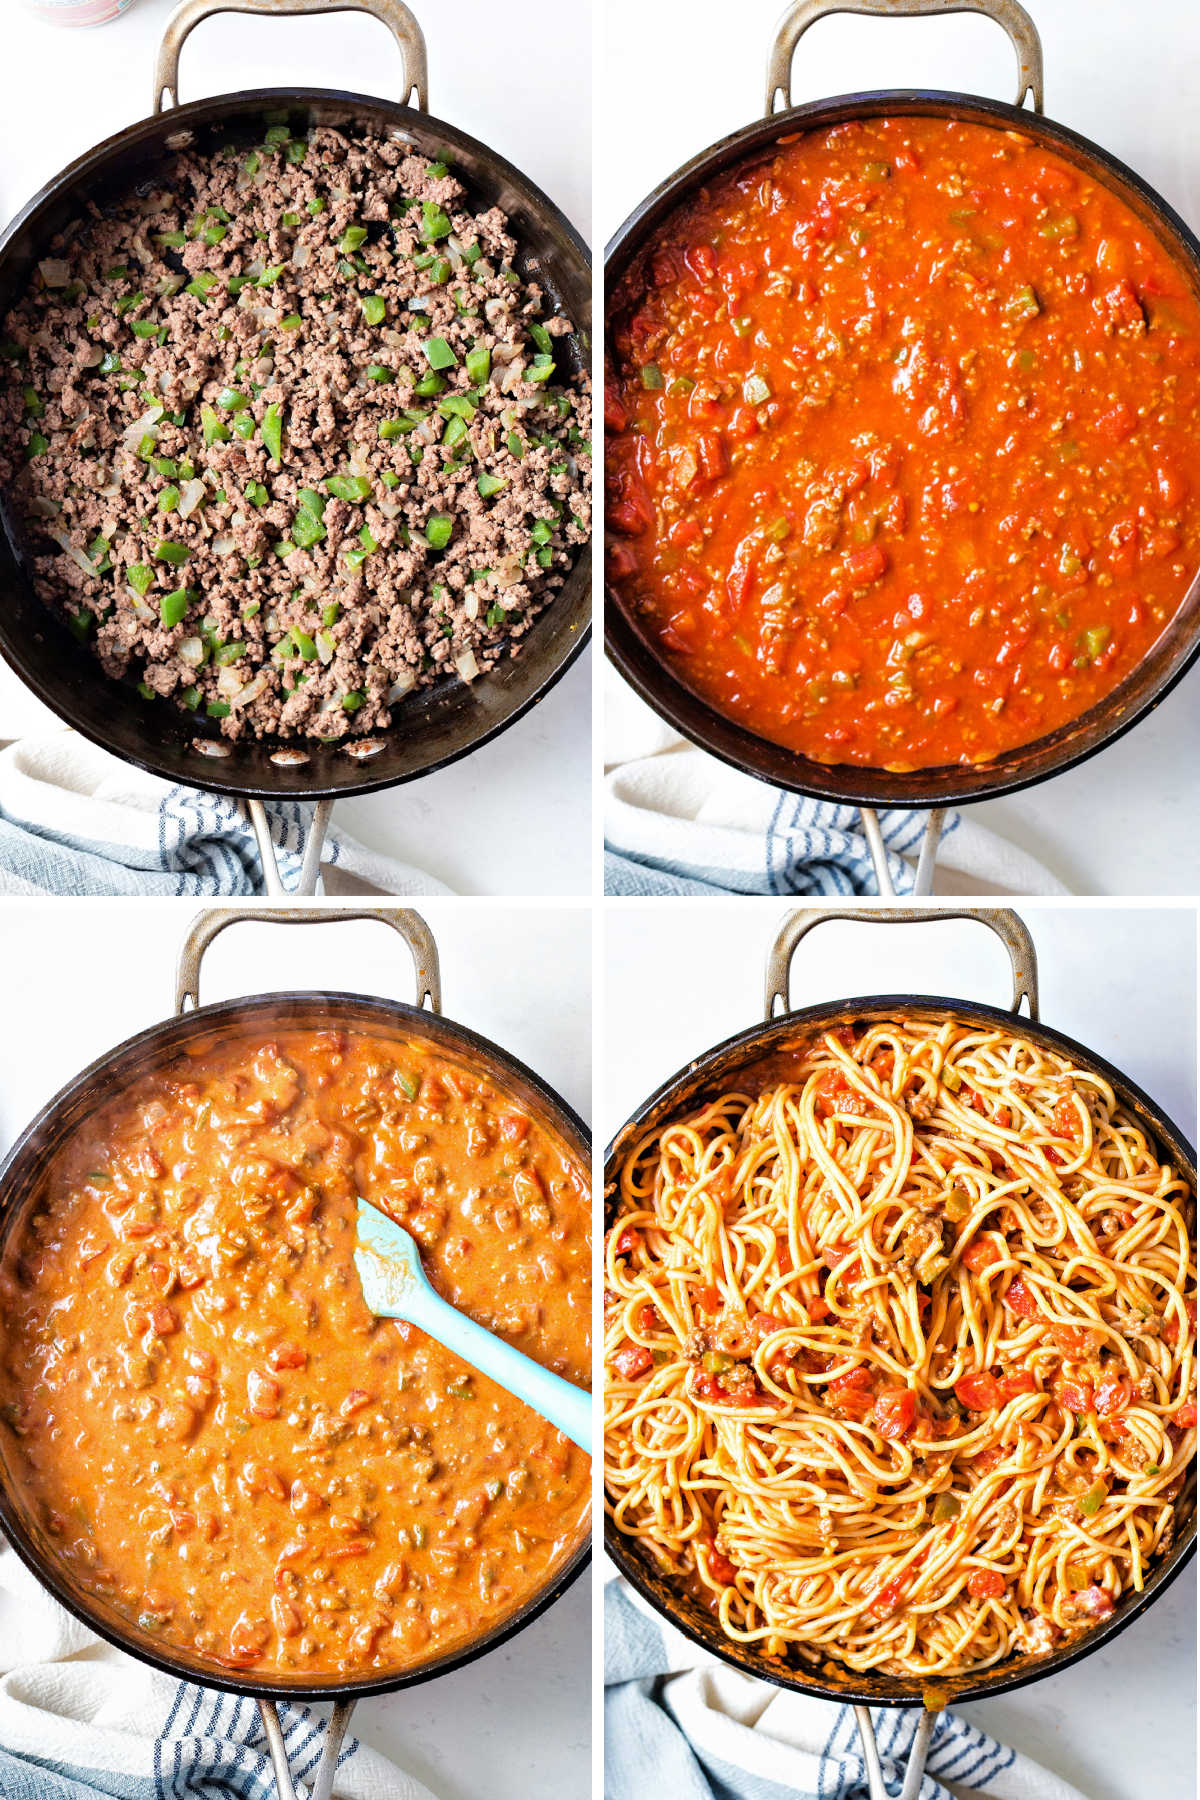 process steps for preparing Mexican spaghetti: brown ground beef in a skillet; add spices and tomatoes; stir in cream cheese; mix in cooked spaghetti noodles.